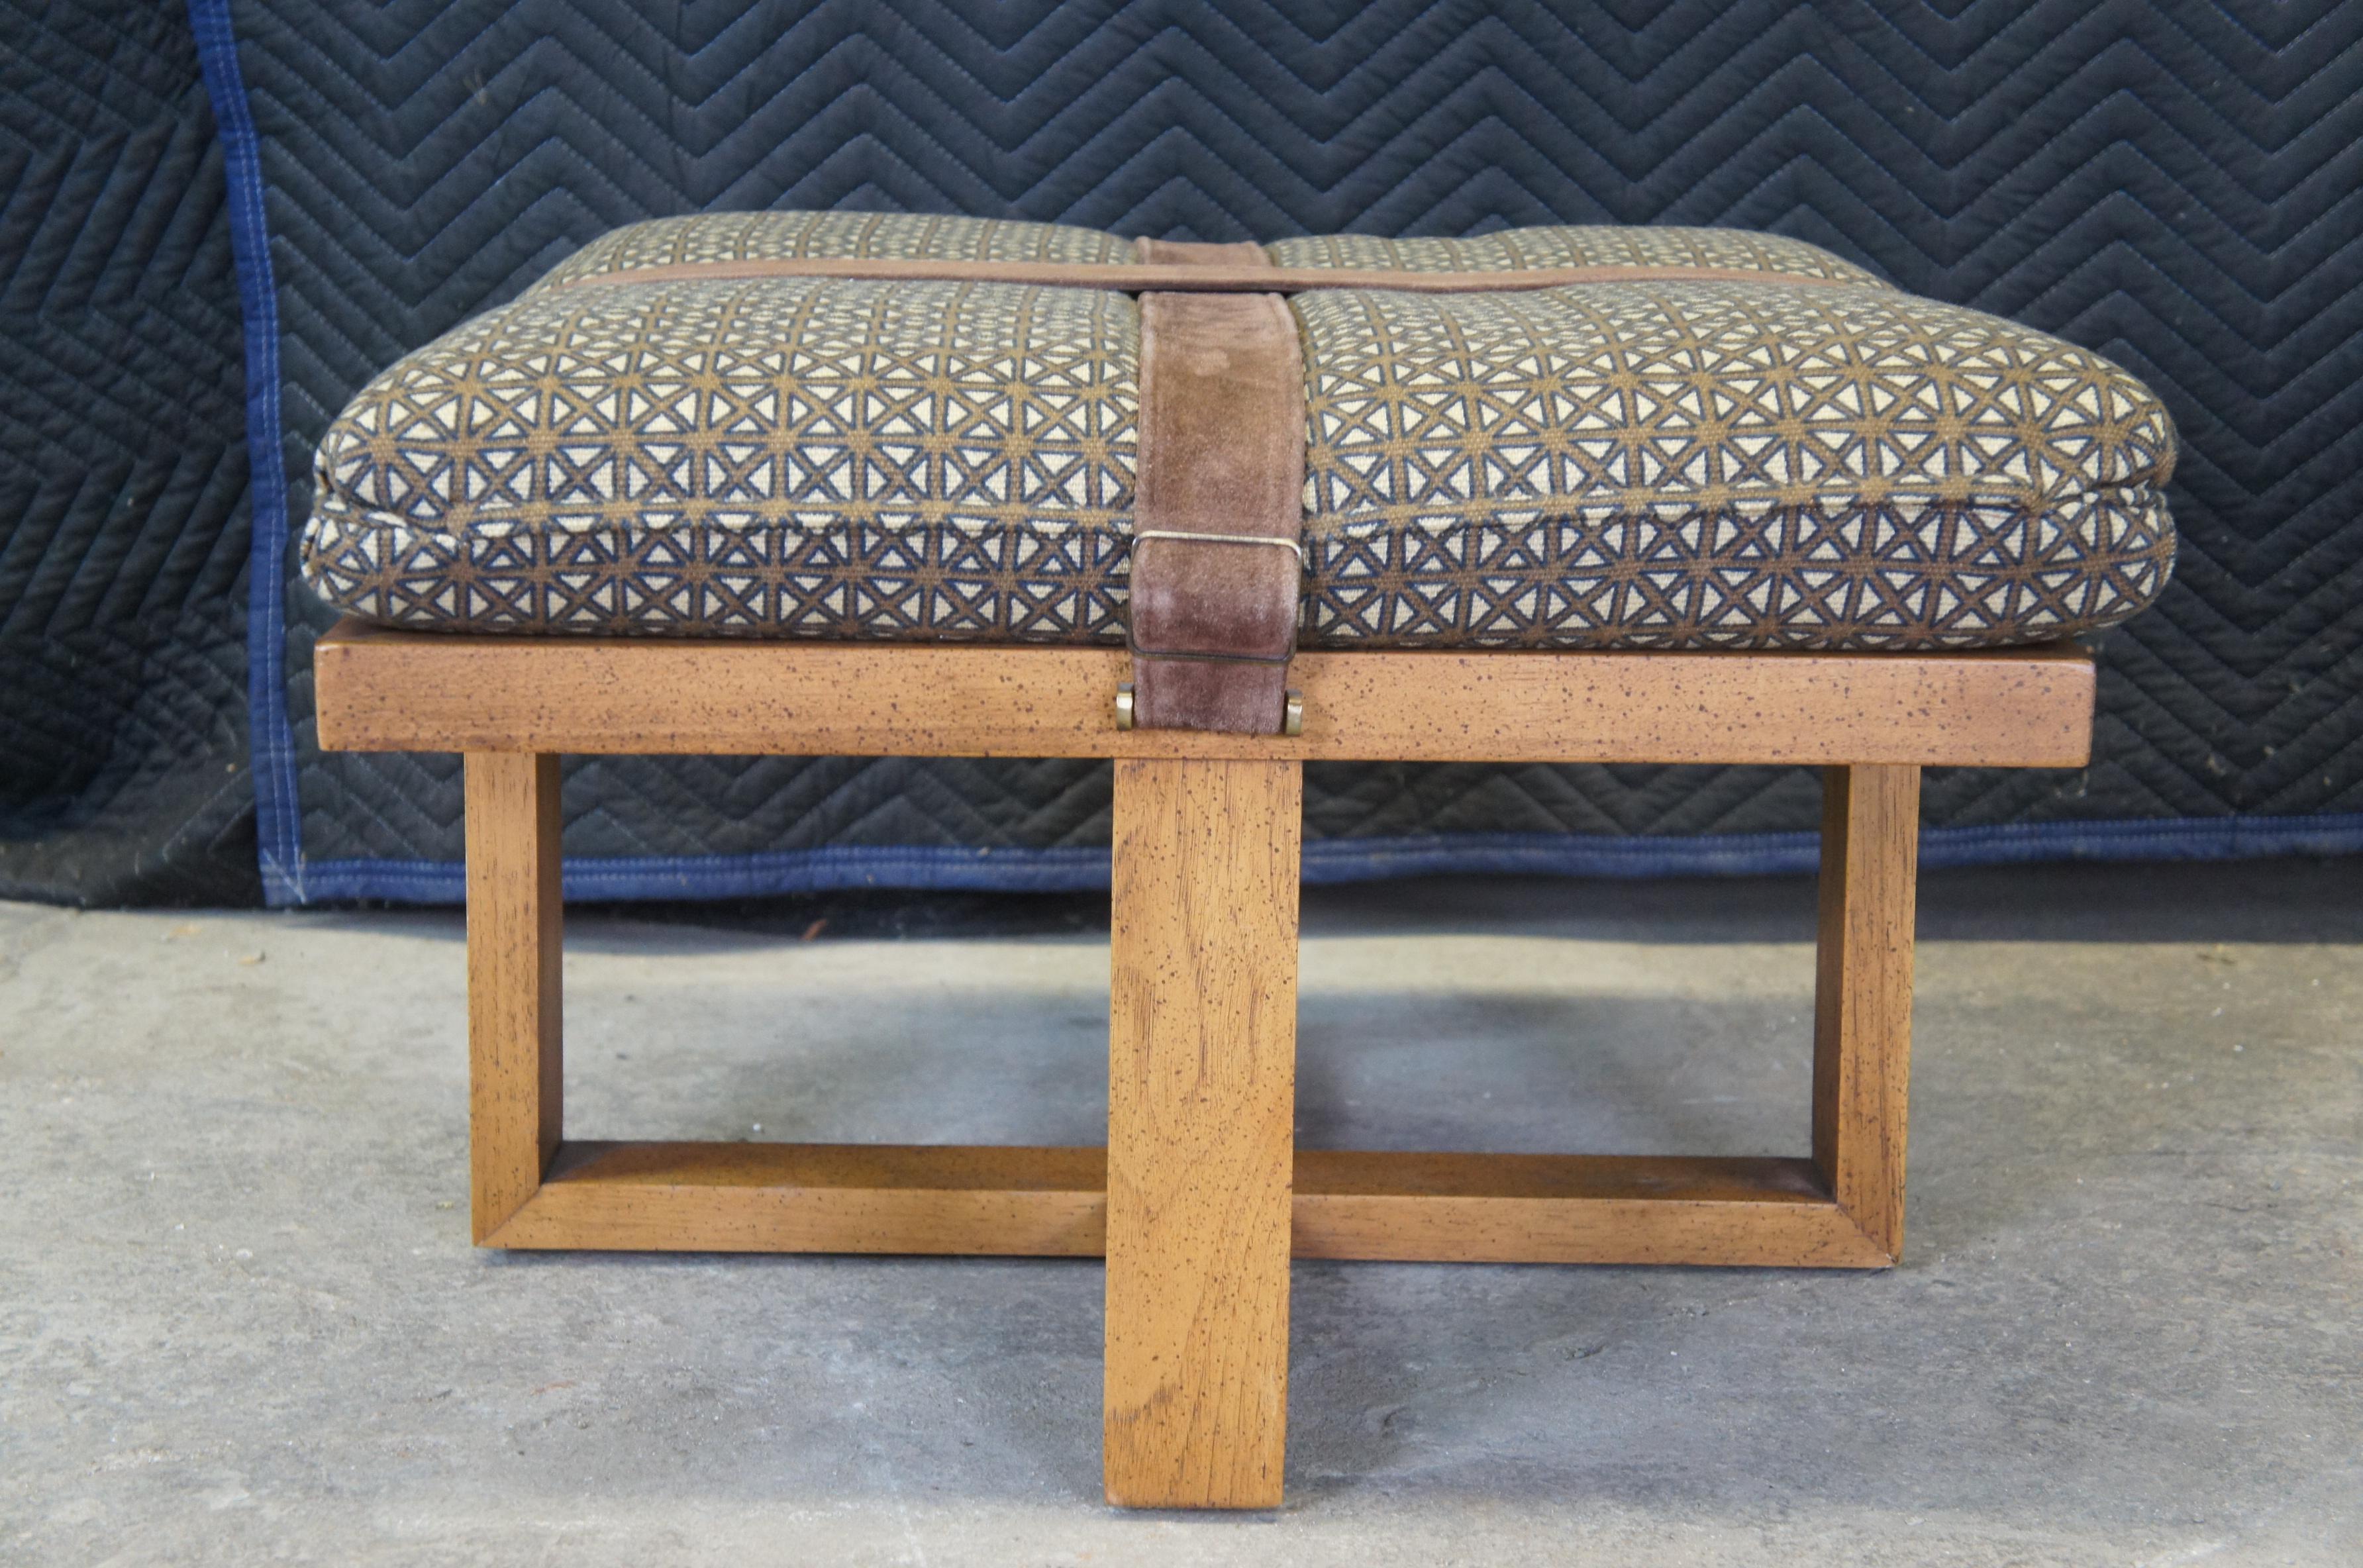 Late 20th C. Modern Oak Buckled Suede Strap Ottoman Square Foot Stool Bench MCM For Sale 2